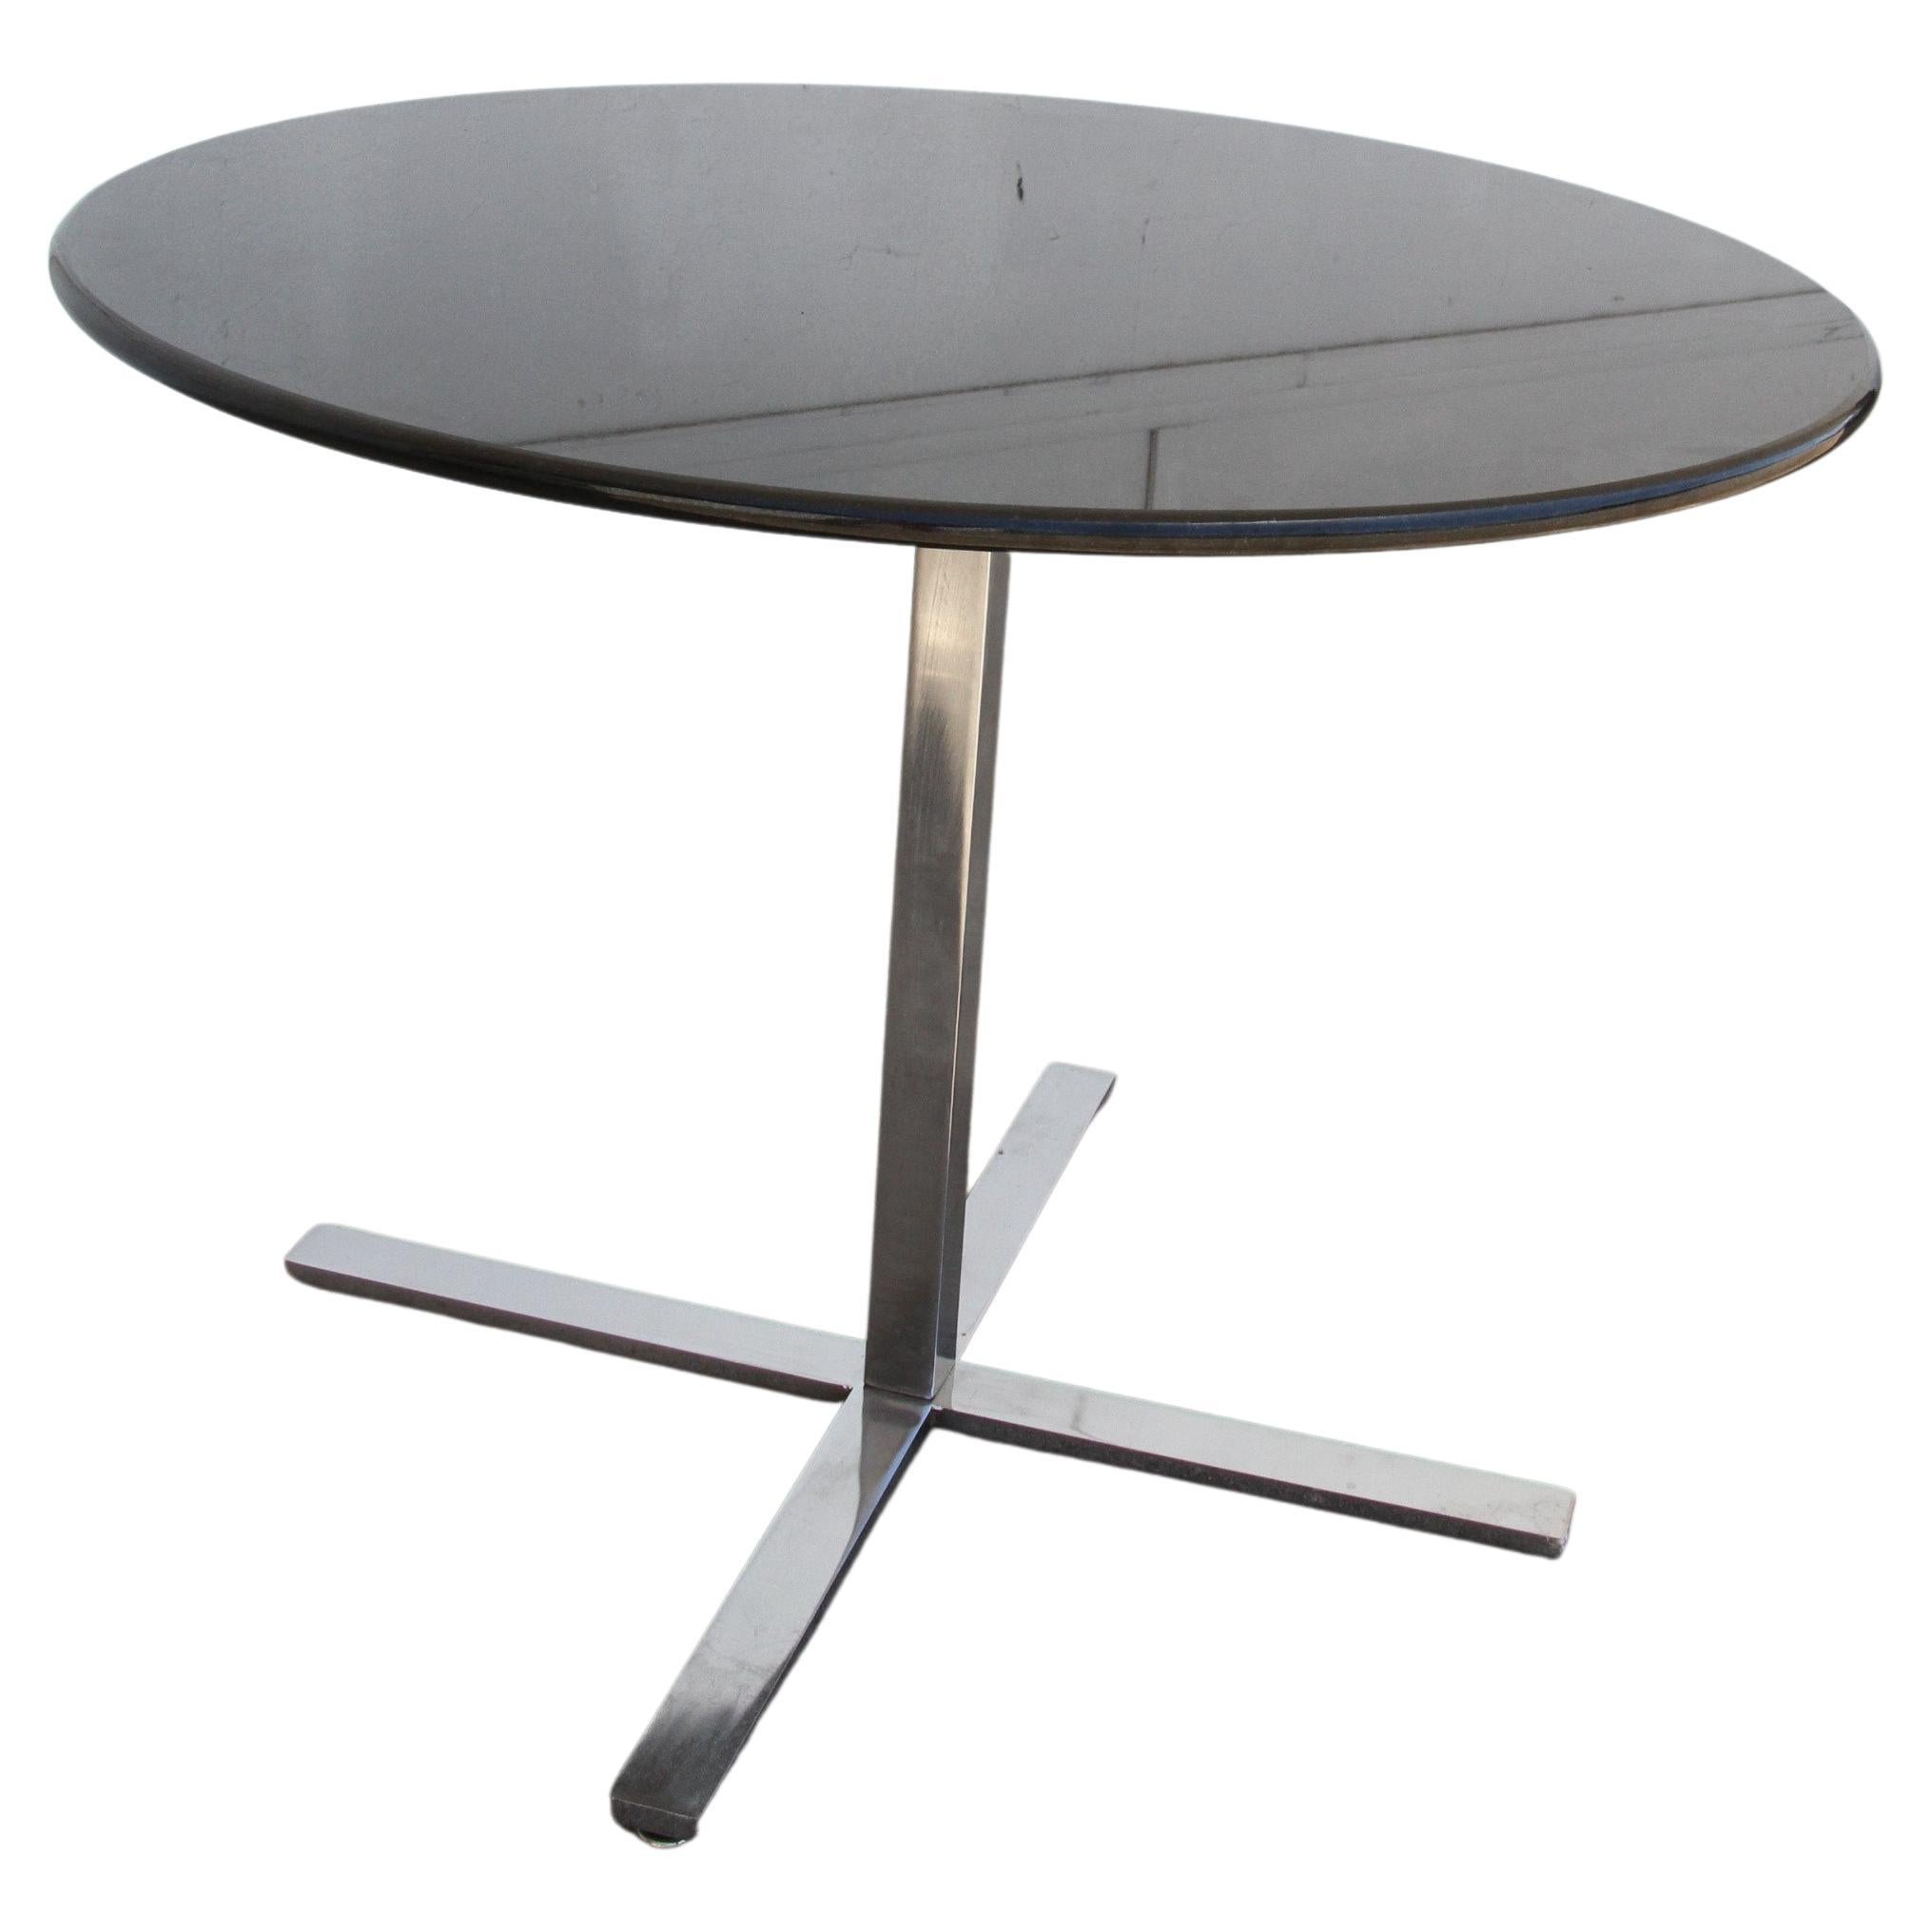 Steelcase 38” Diameter Round Granite Table with Stainless Base 
 
Modern mid century elegant table with 4 star base. 